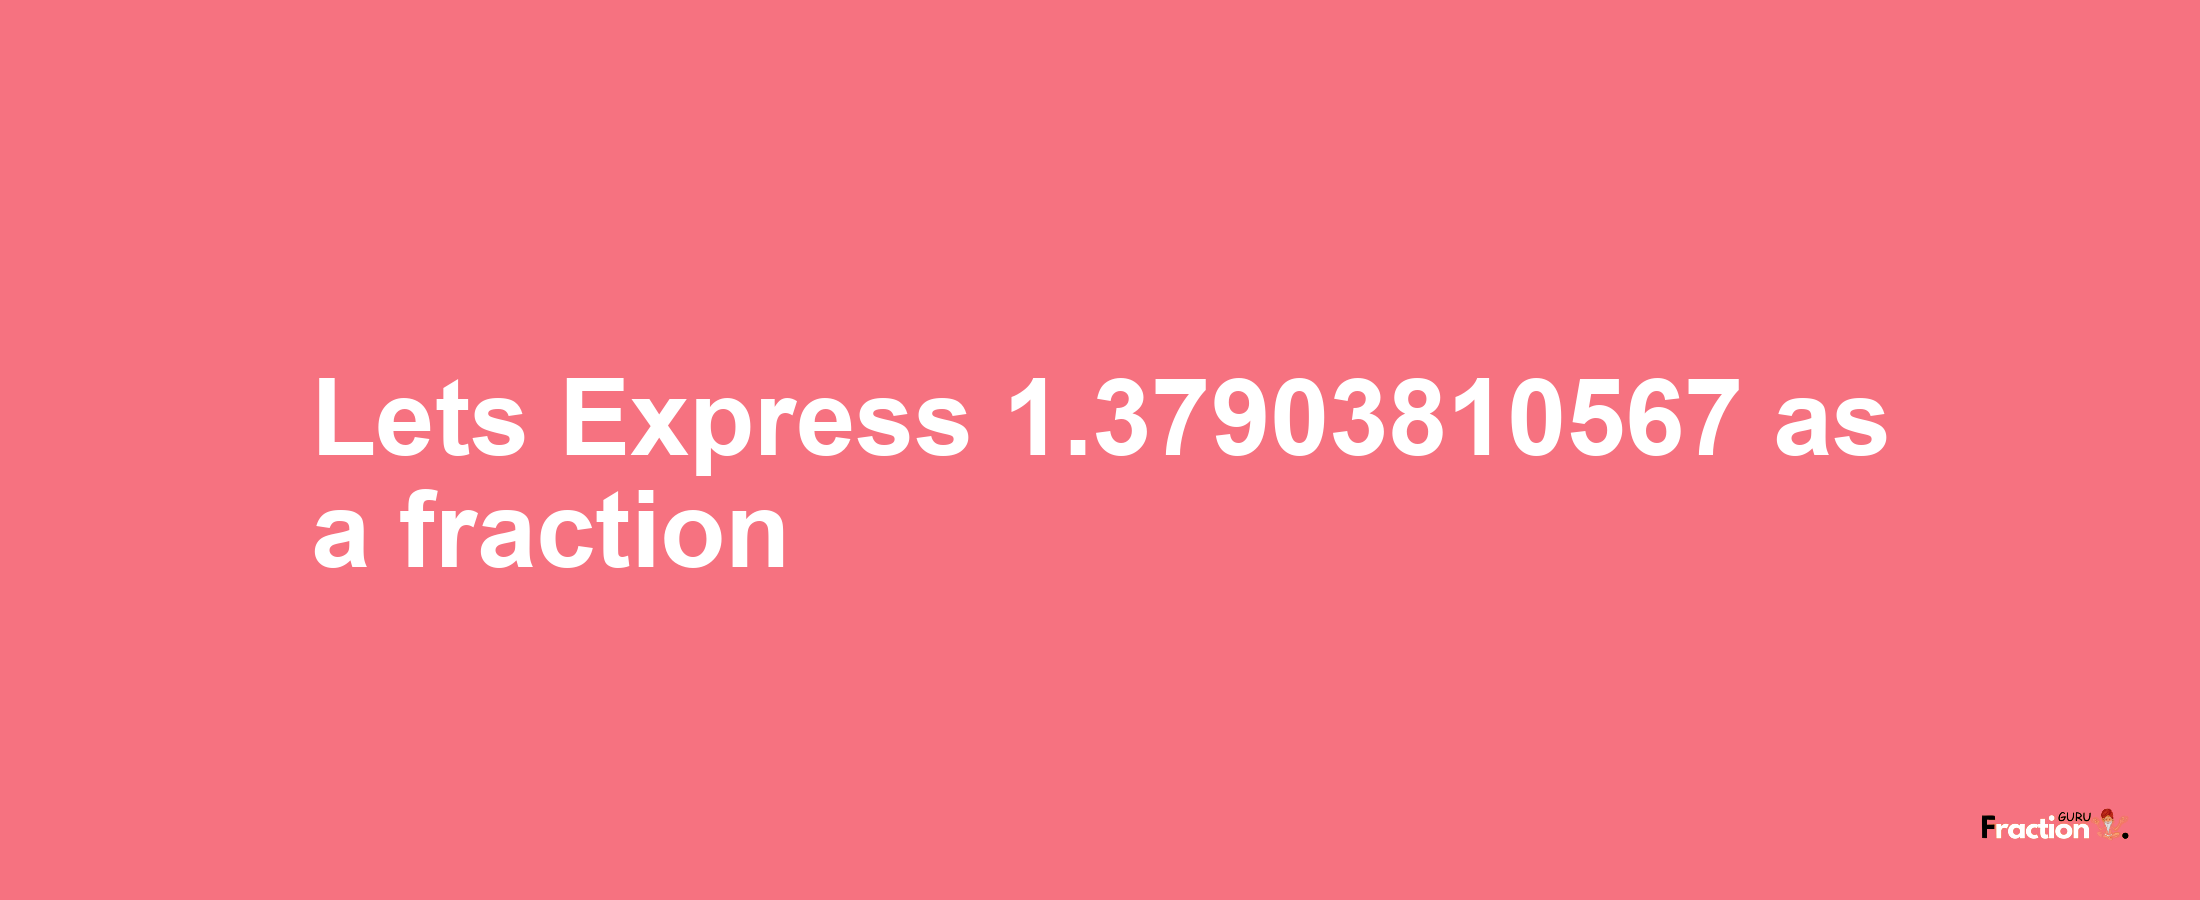 Lets Express 1.37903810567 as afraction